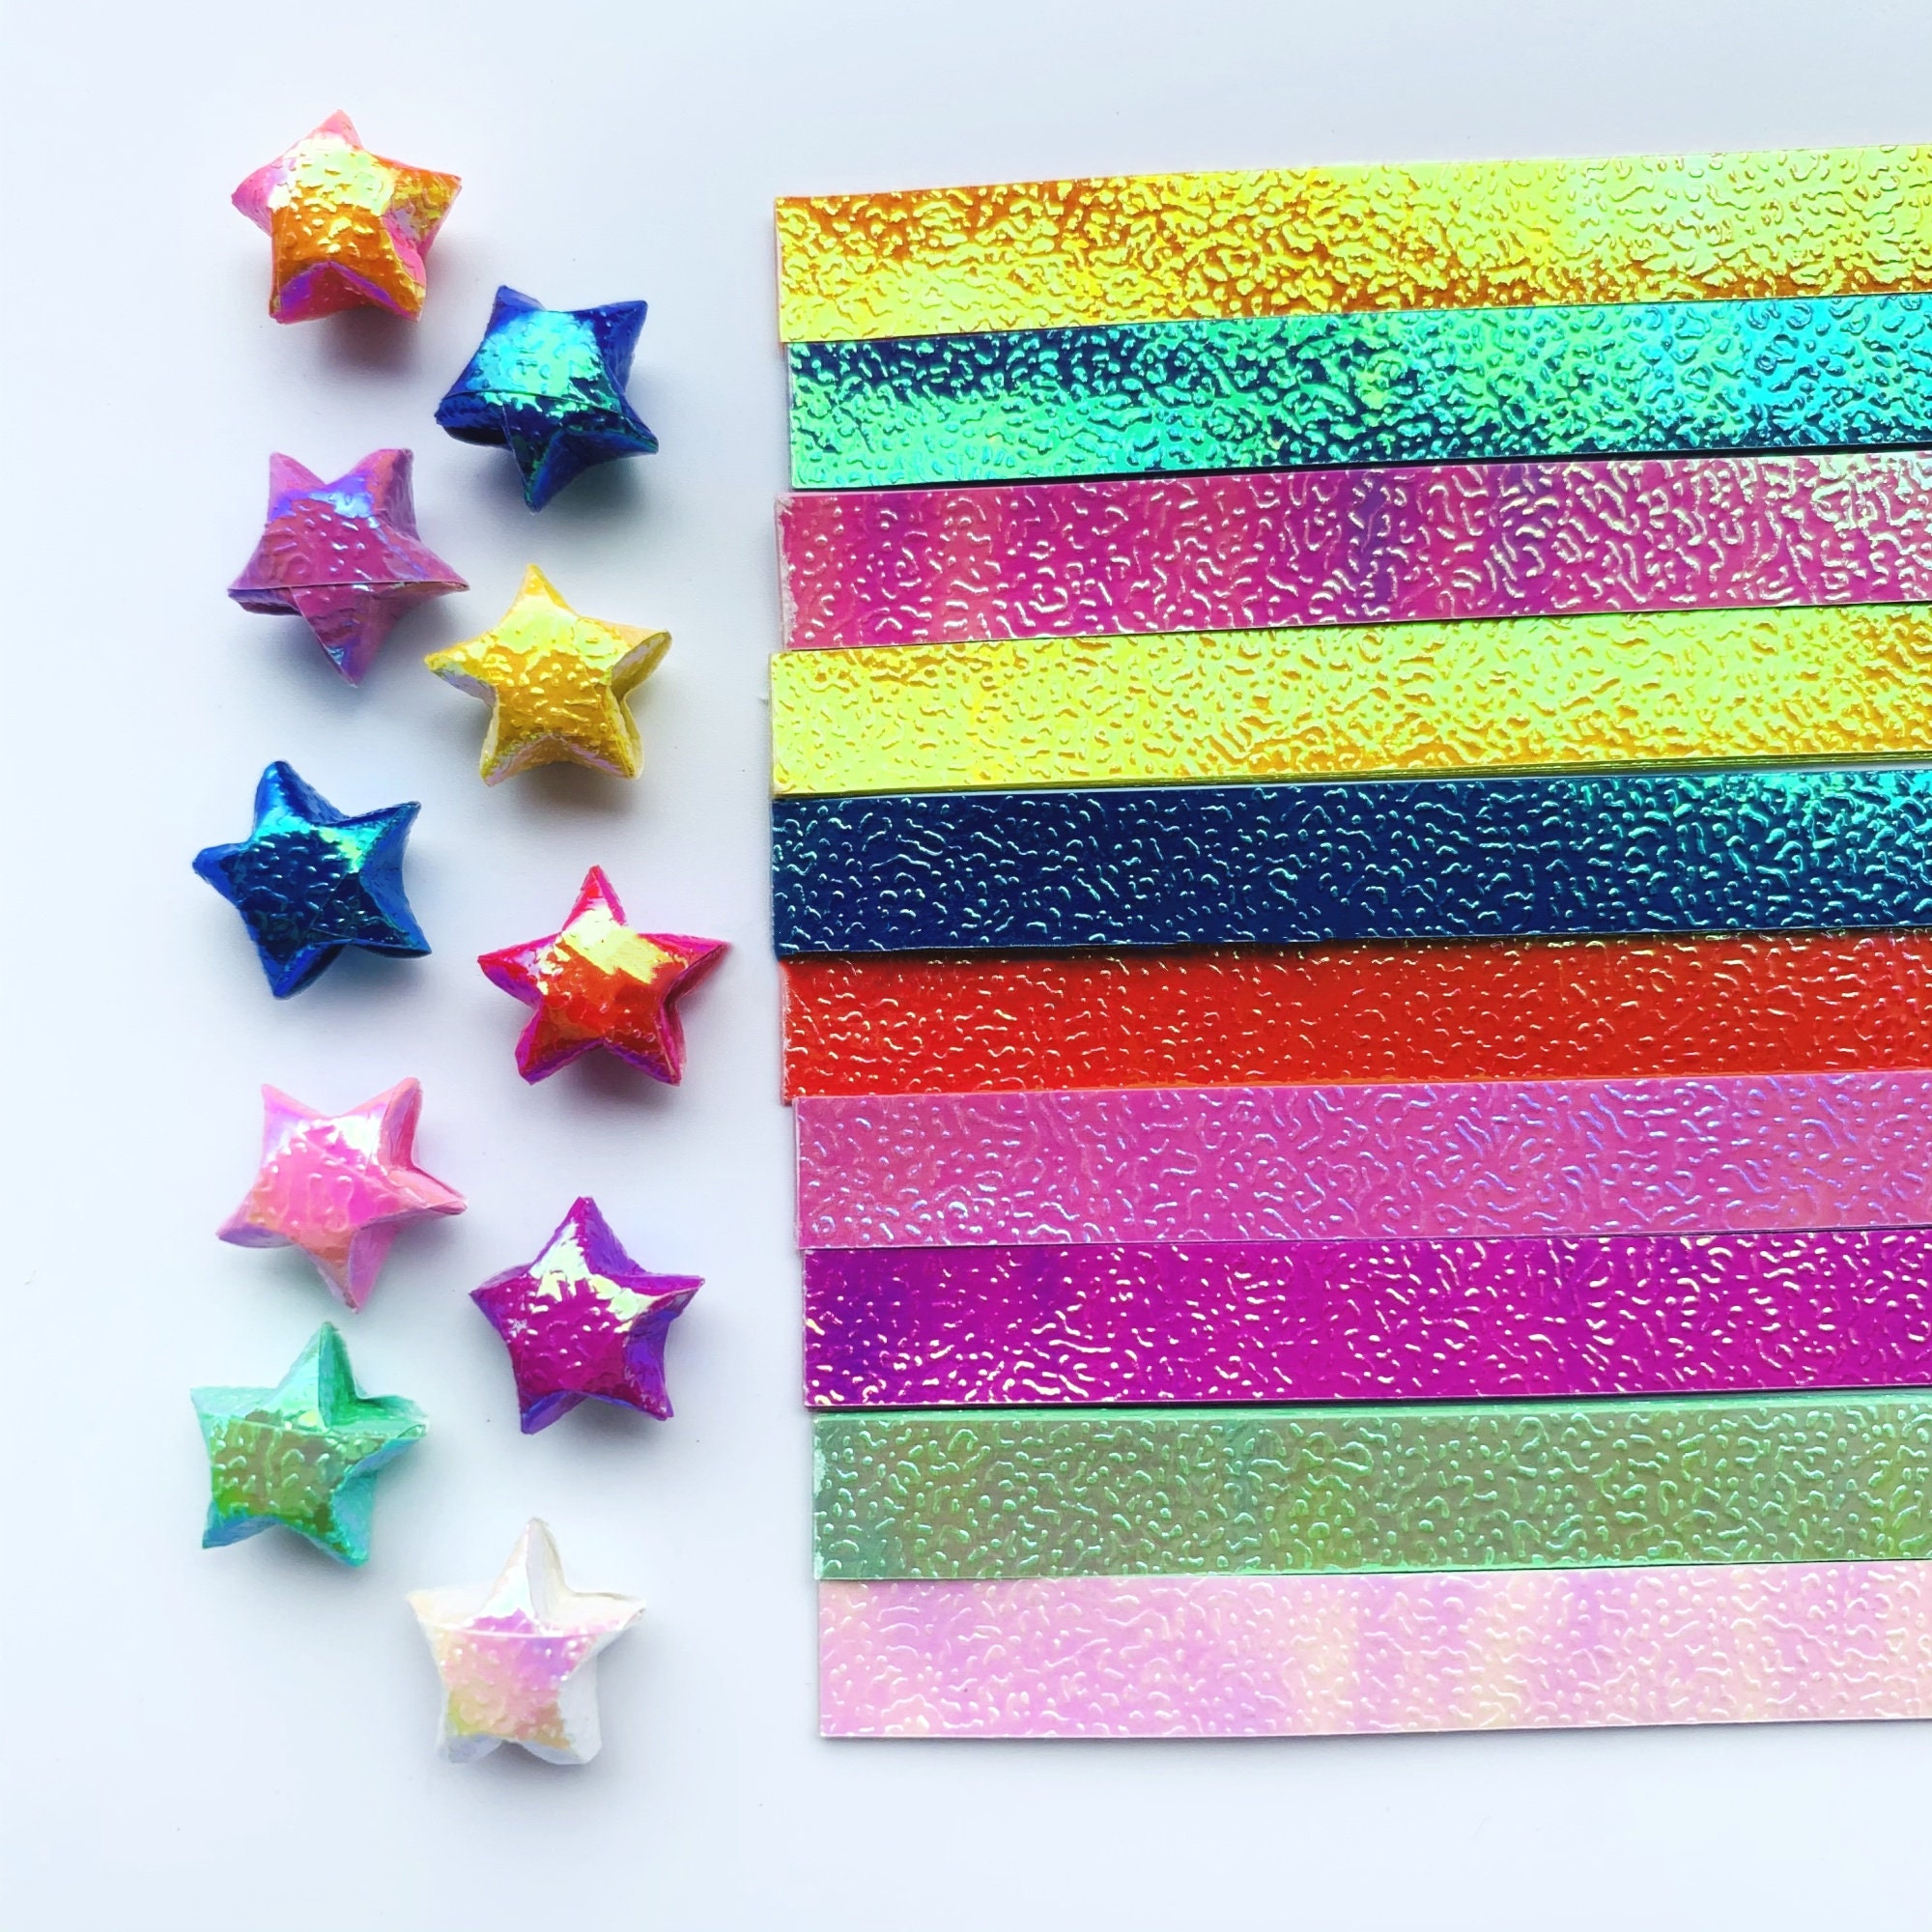 540 Sheets Lucky Origami Stars Paper Strips Double Sided Origami Stars 27  Color Decor Folding Paper For Arts Crafting Supplies - AliExpress